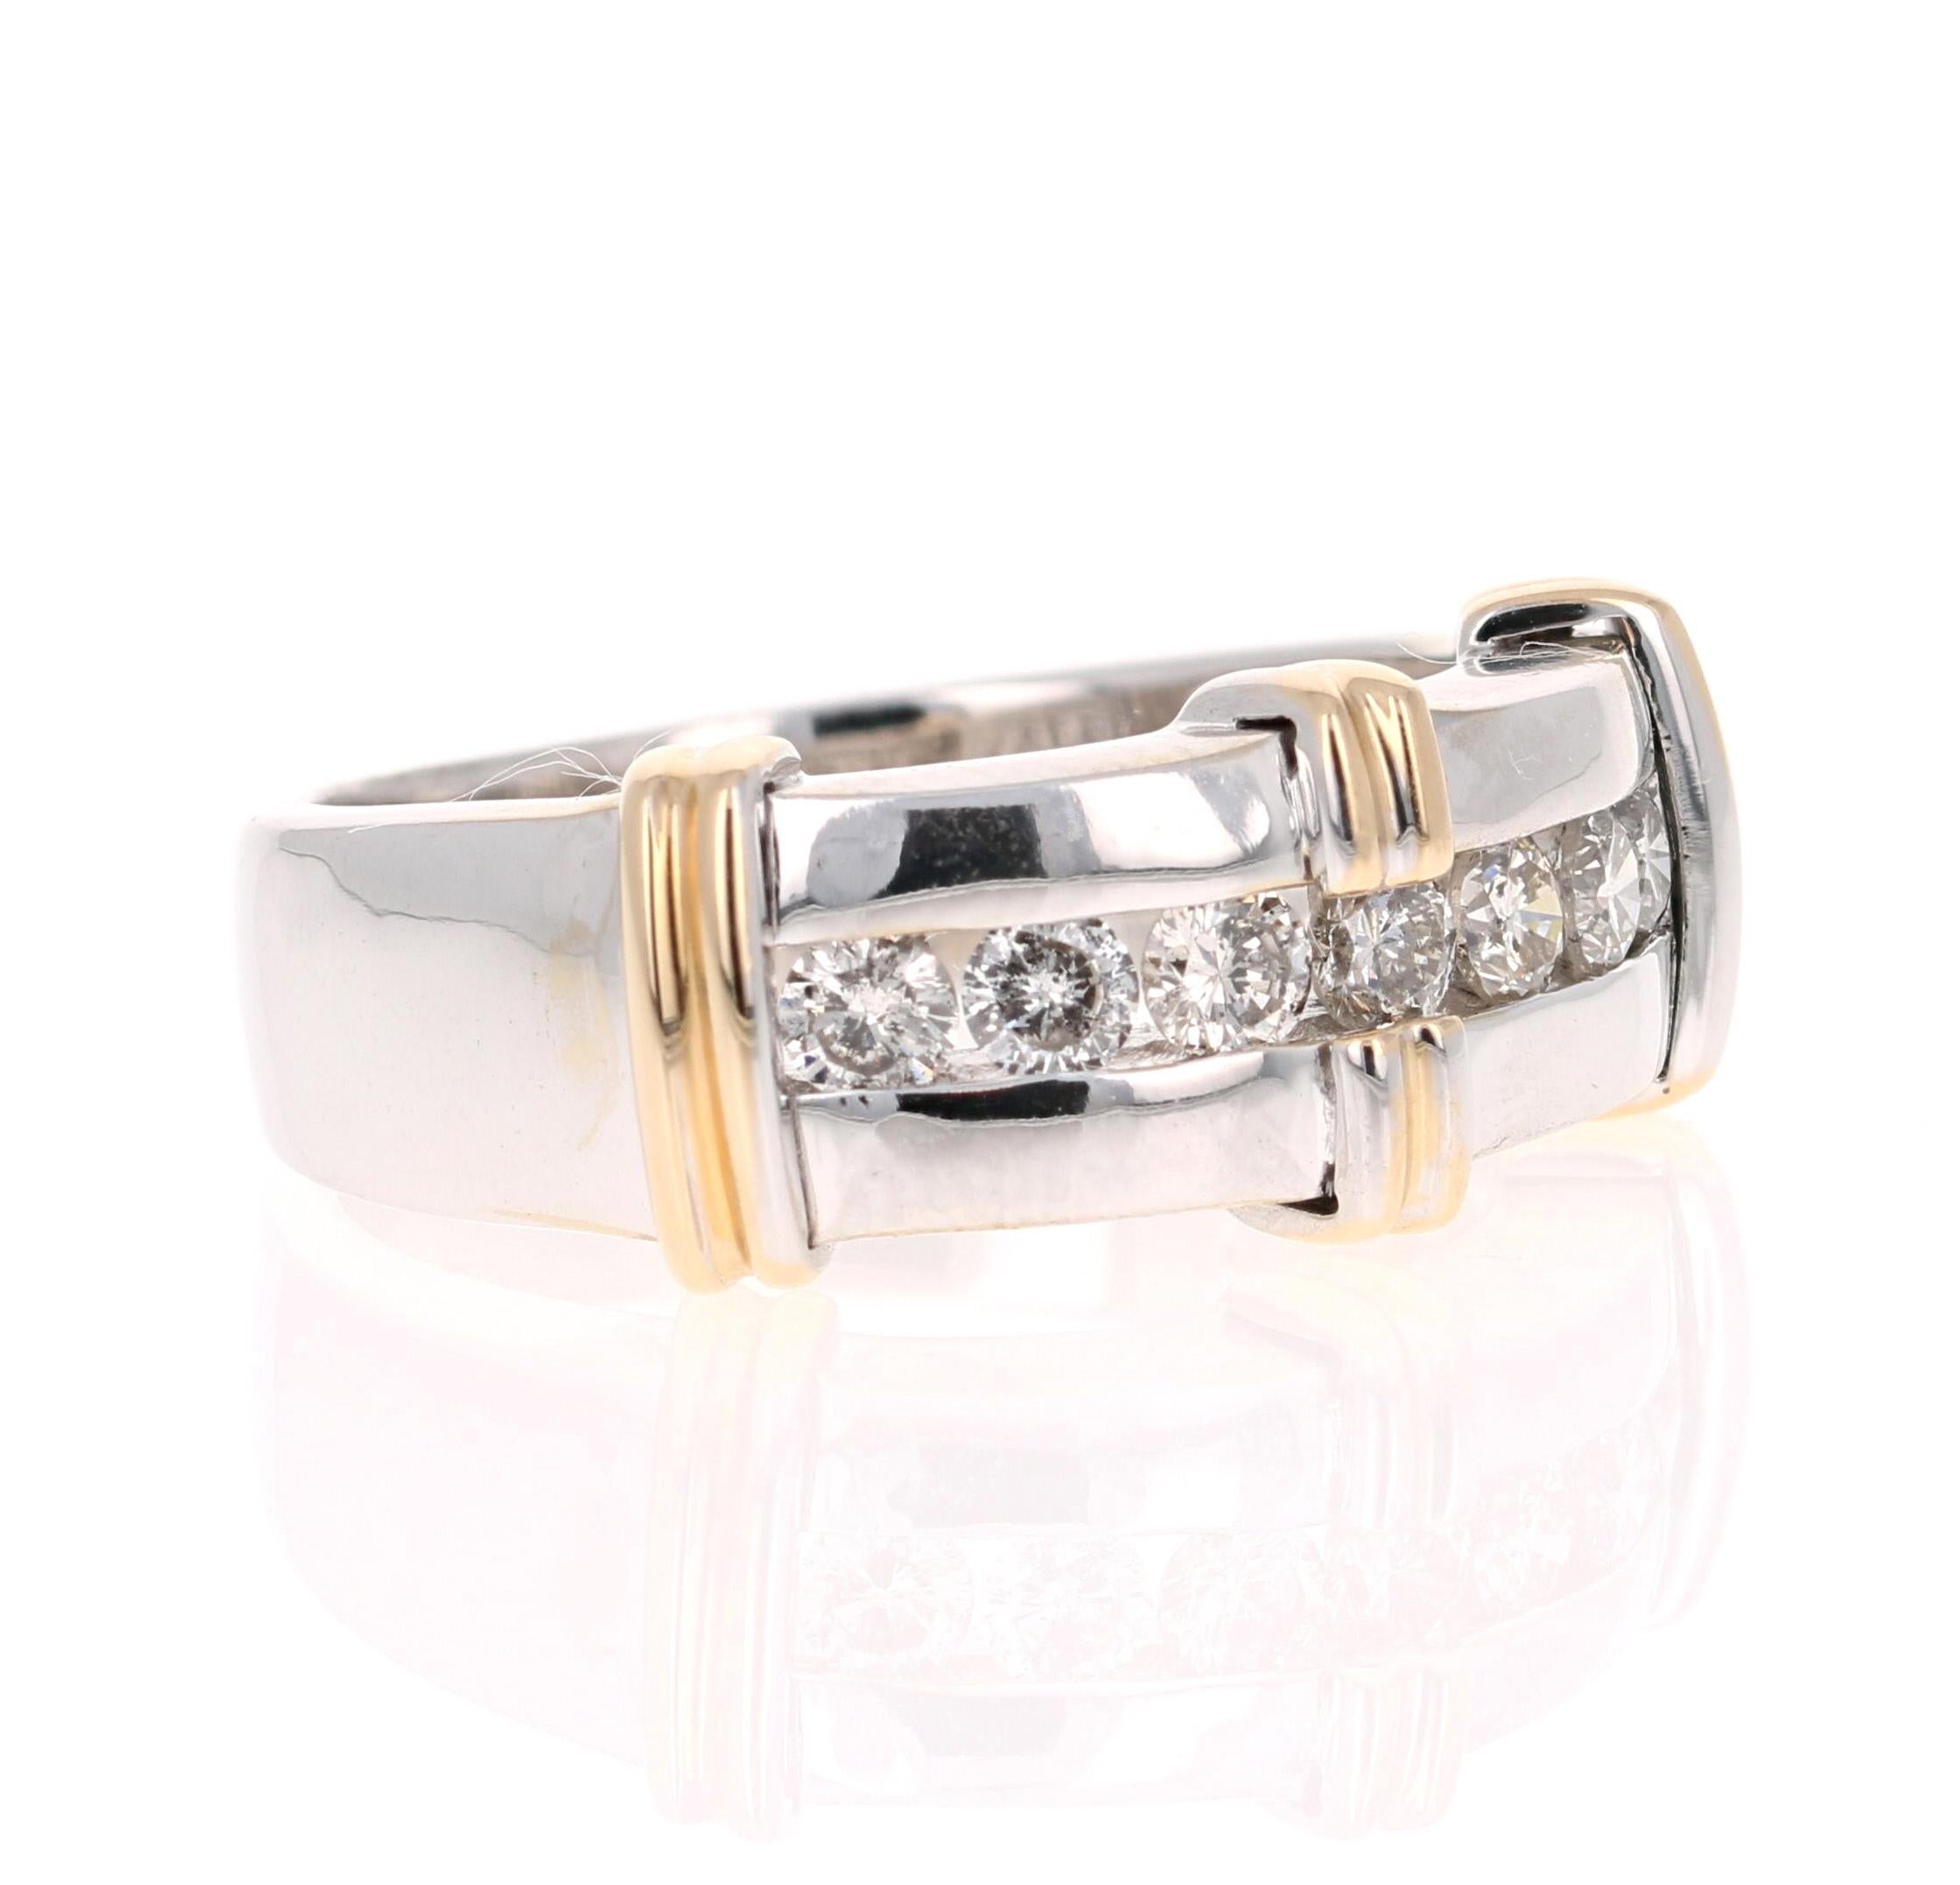 We have a Men's Collection of Fine Jewelry!  Beautiful, Bold, Masculine and Simple Men's Wedding Rings/Bands. 

This Men's Band has 7 Round Cut Diamonds that weighs 0.90 Carats.  The Clarity and Color of the Diamonds is SI-I.
It is crafted in 14